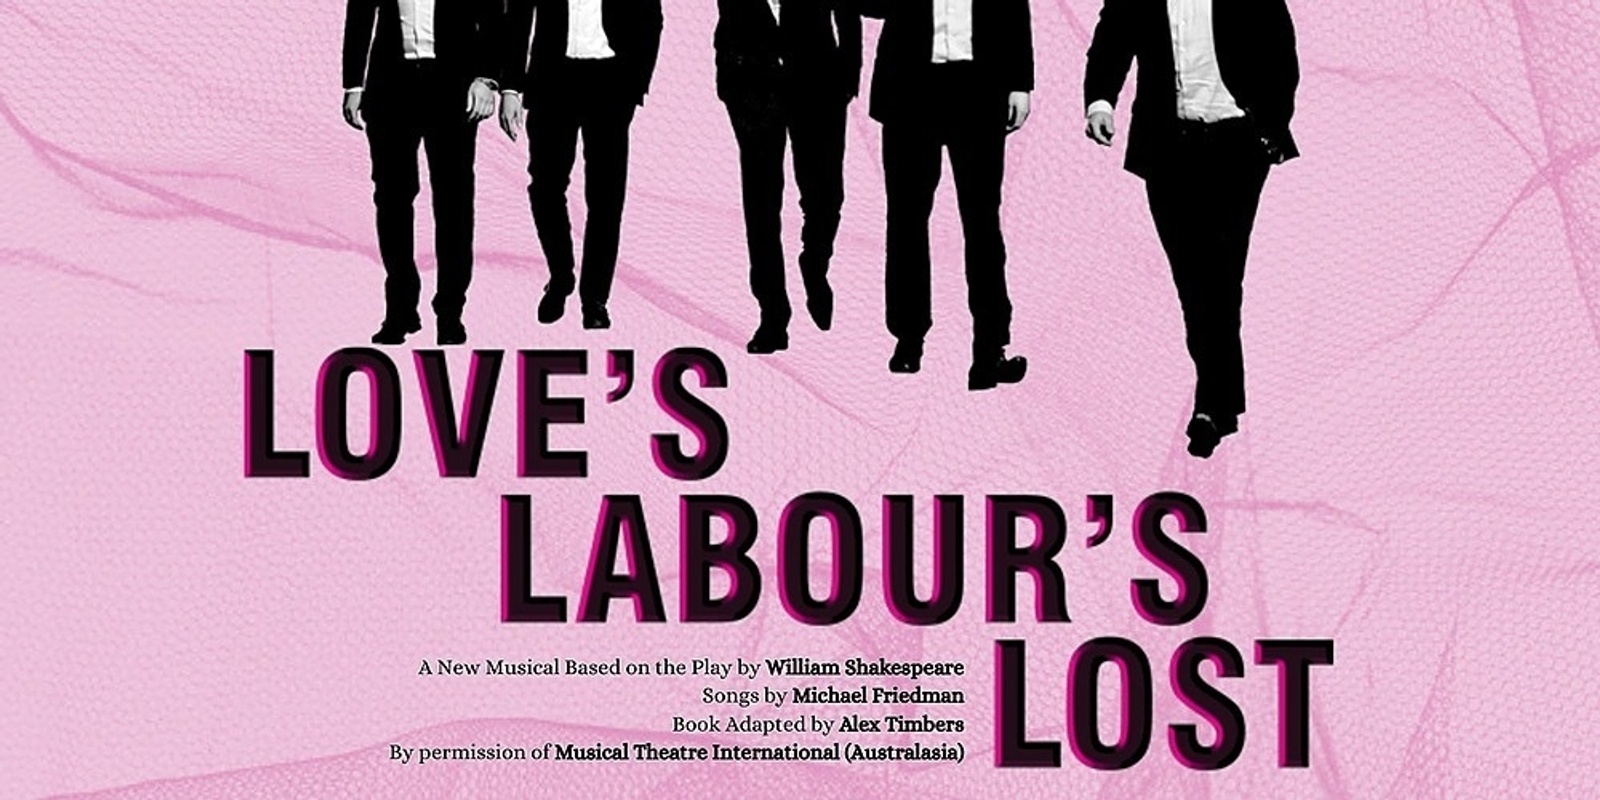 Banner image for Love's Labour's Lost